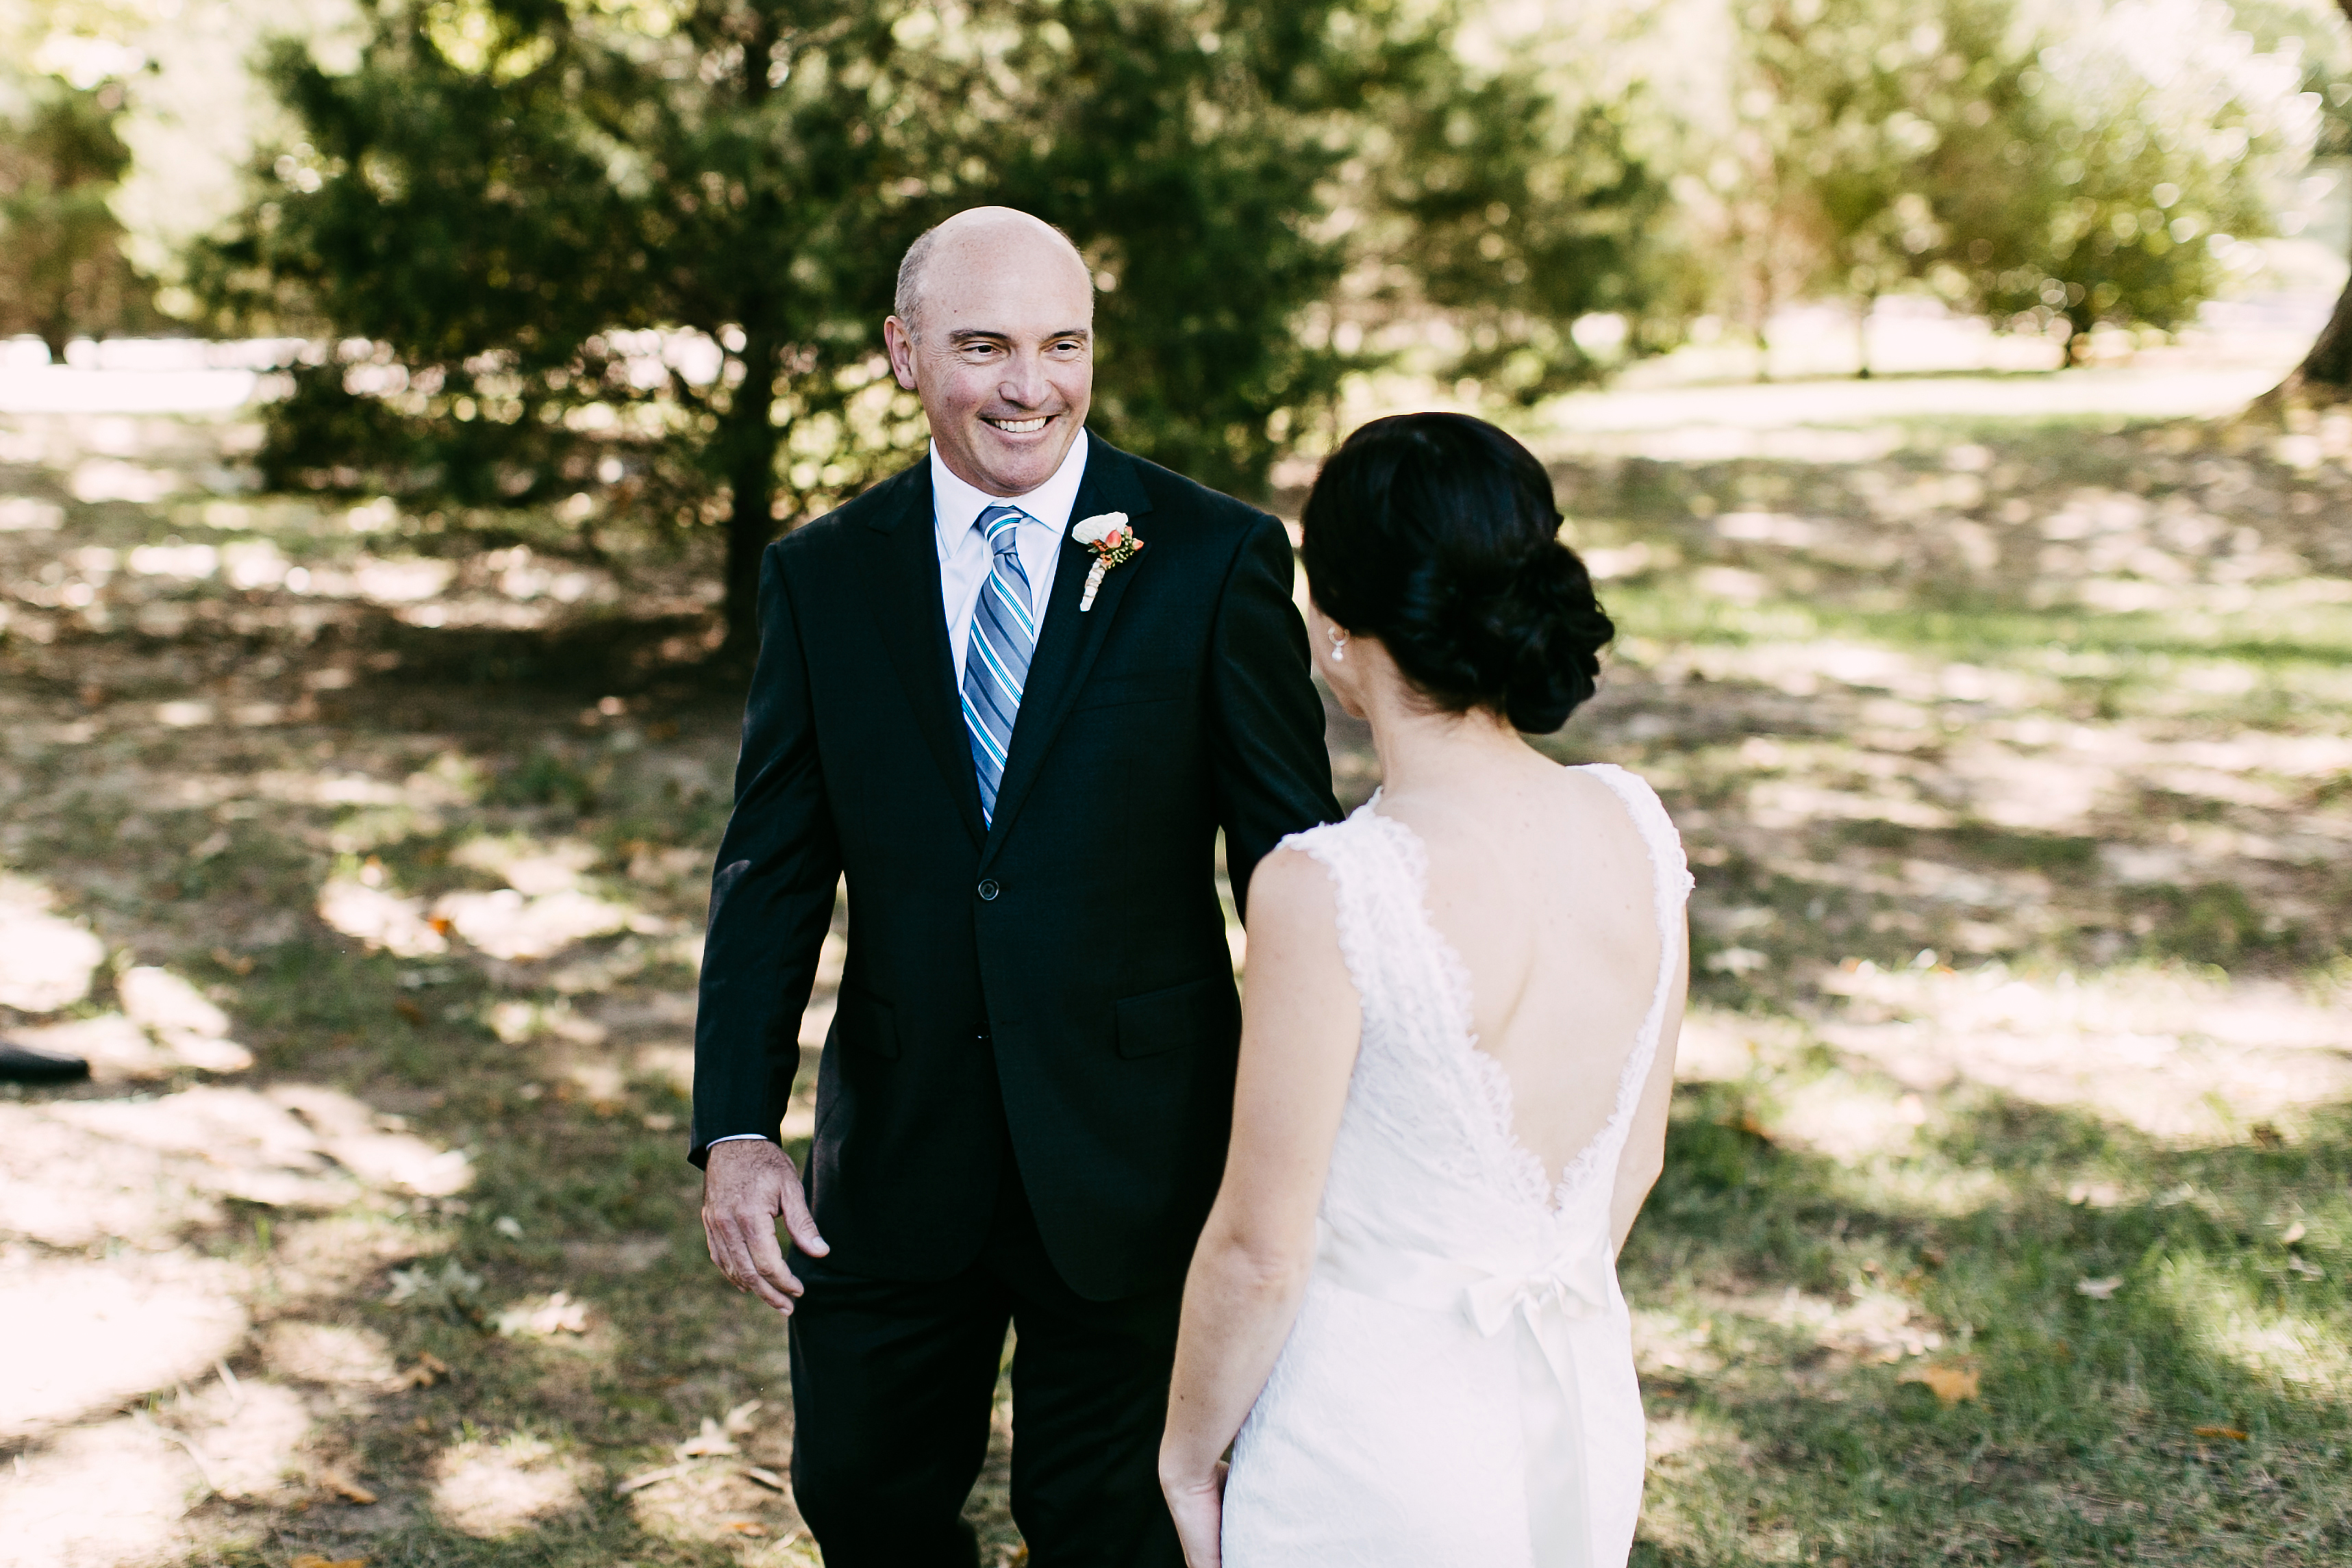 father-daughter-first-look-dad-seeing-daughter-creative-wedding-photographer-candid-wedding-photography-spring-creek-ranch